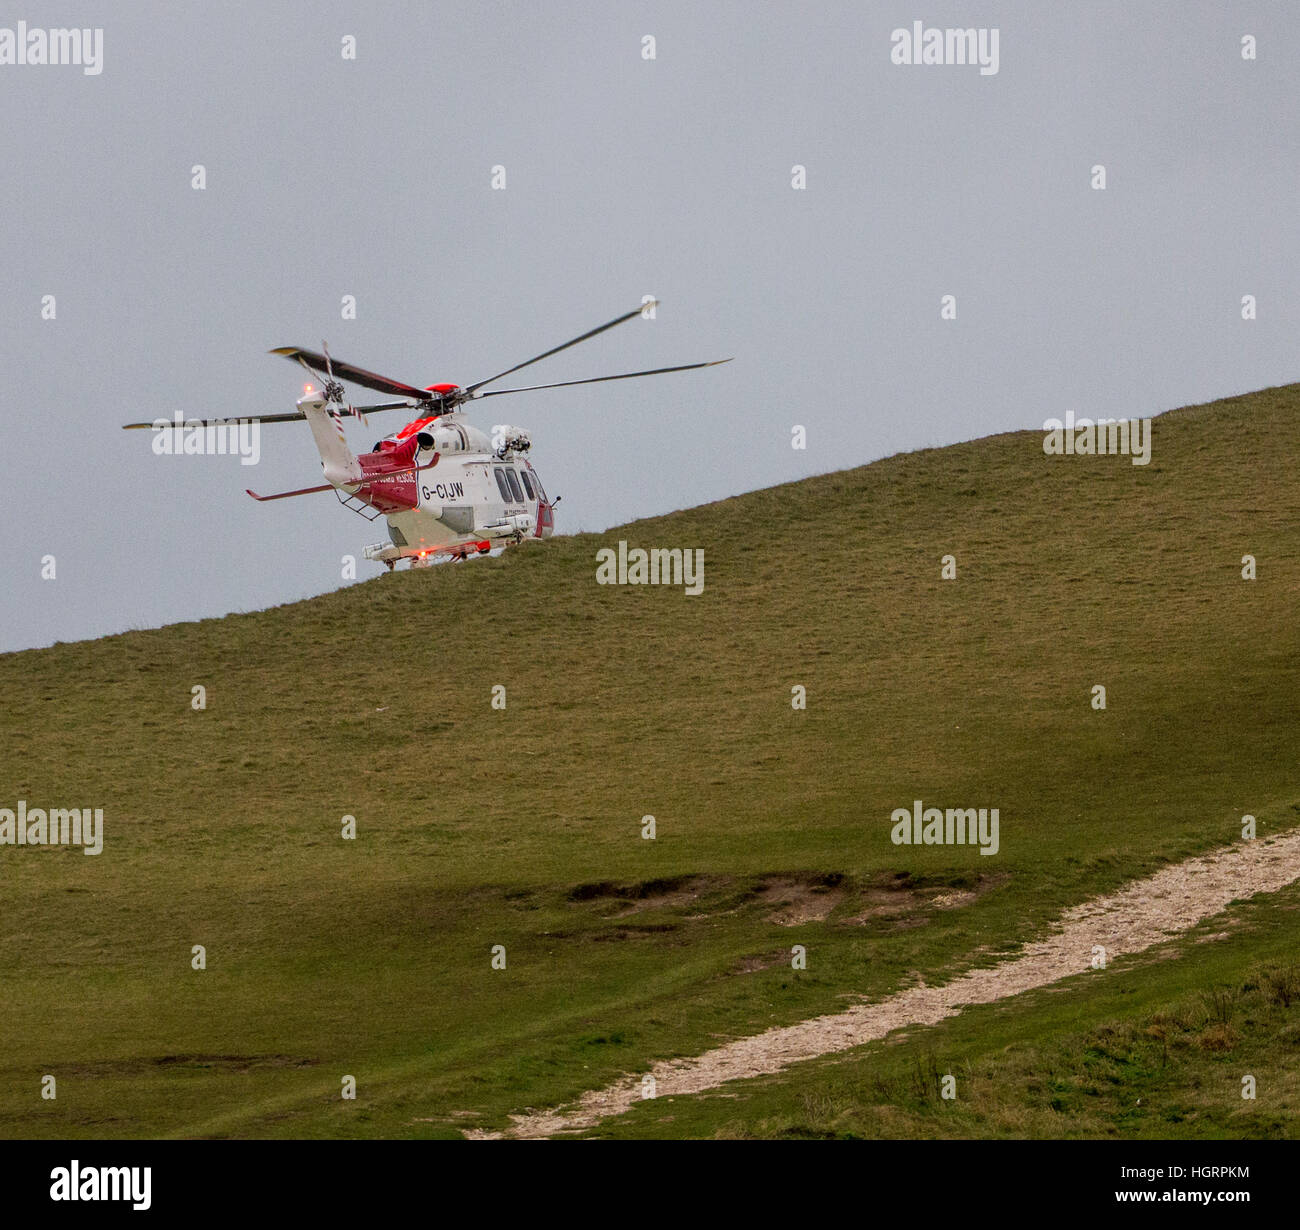 Beachy Head, East Sussex, United Kingdom. 12th Jan, 2017. A Coast Guard Helicopter assists in the search for a person believed to have fallen from the cliffs near Belle Toute lighthouse, after an abandoned motorcycle and clothing were found. A body was later recovered from the beach below at this notorious suicide spot on the South coast of England.In May 2017 the coroner, Alan Cruze found that the victim Ashleigh Connor Martin had taken his own life. Credit: © Alan Fraser/Alamy Live News Stock Photo